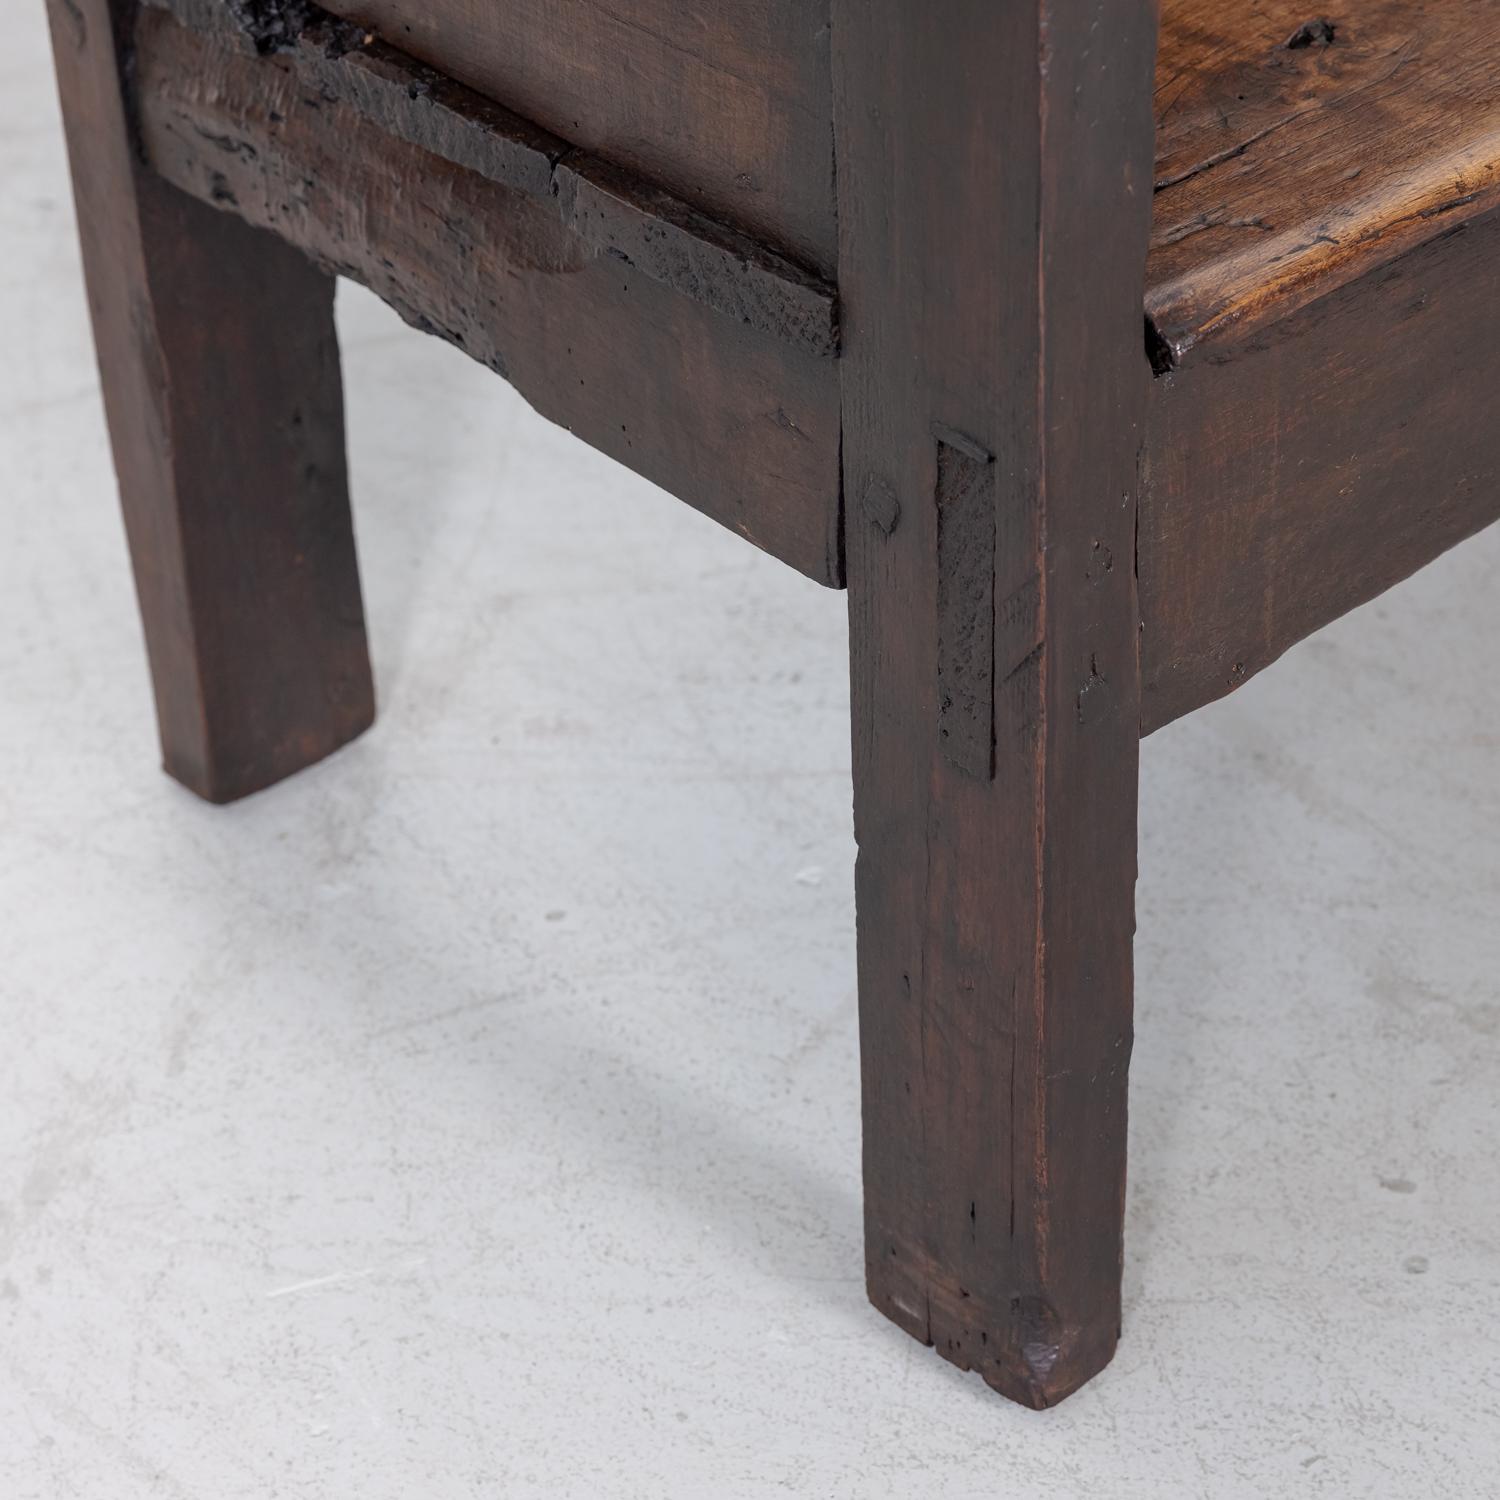 Rustic Mid-18th Century Spanish Walnut Bench with Arms 9